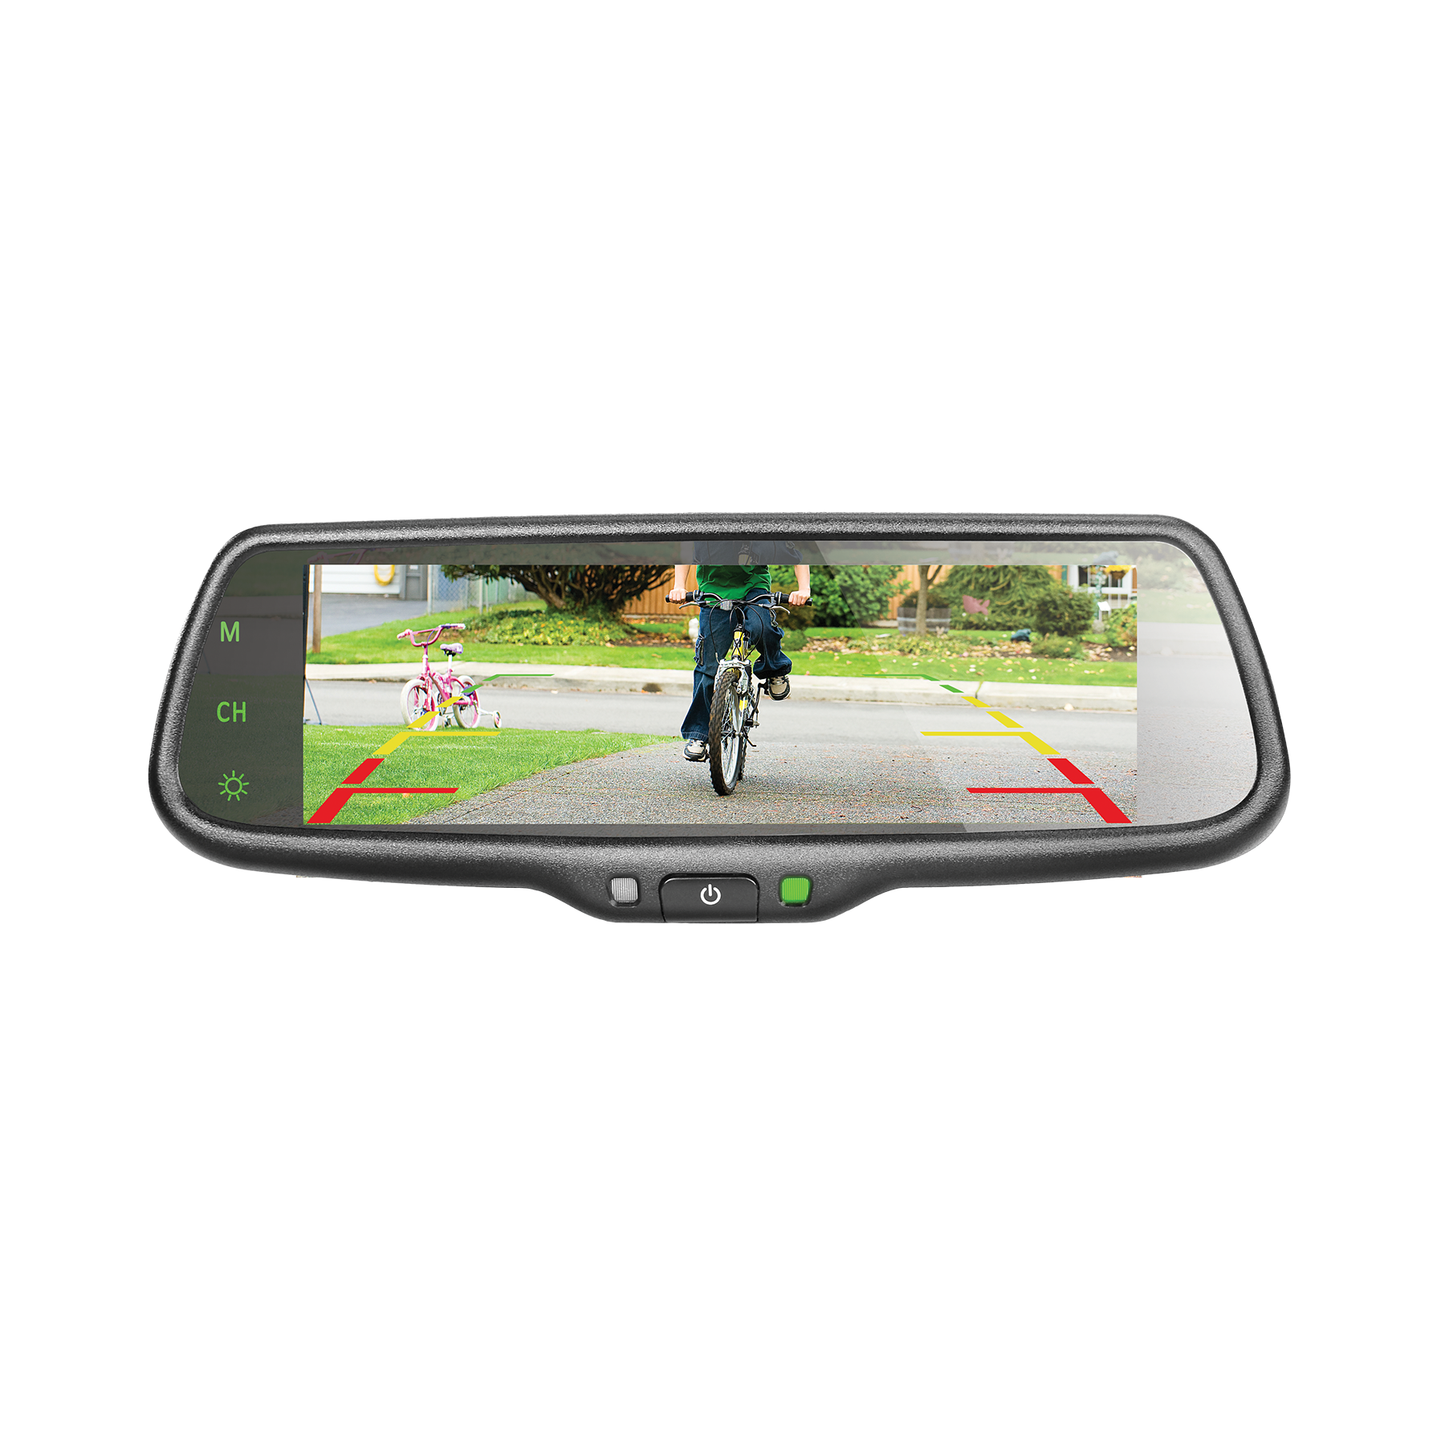 7.3” Car Rear View Mirror Monitor with removable bracket